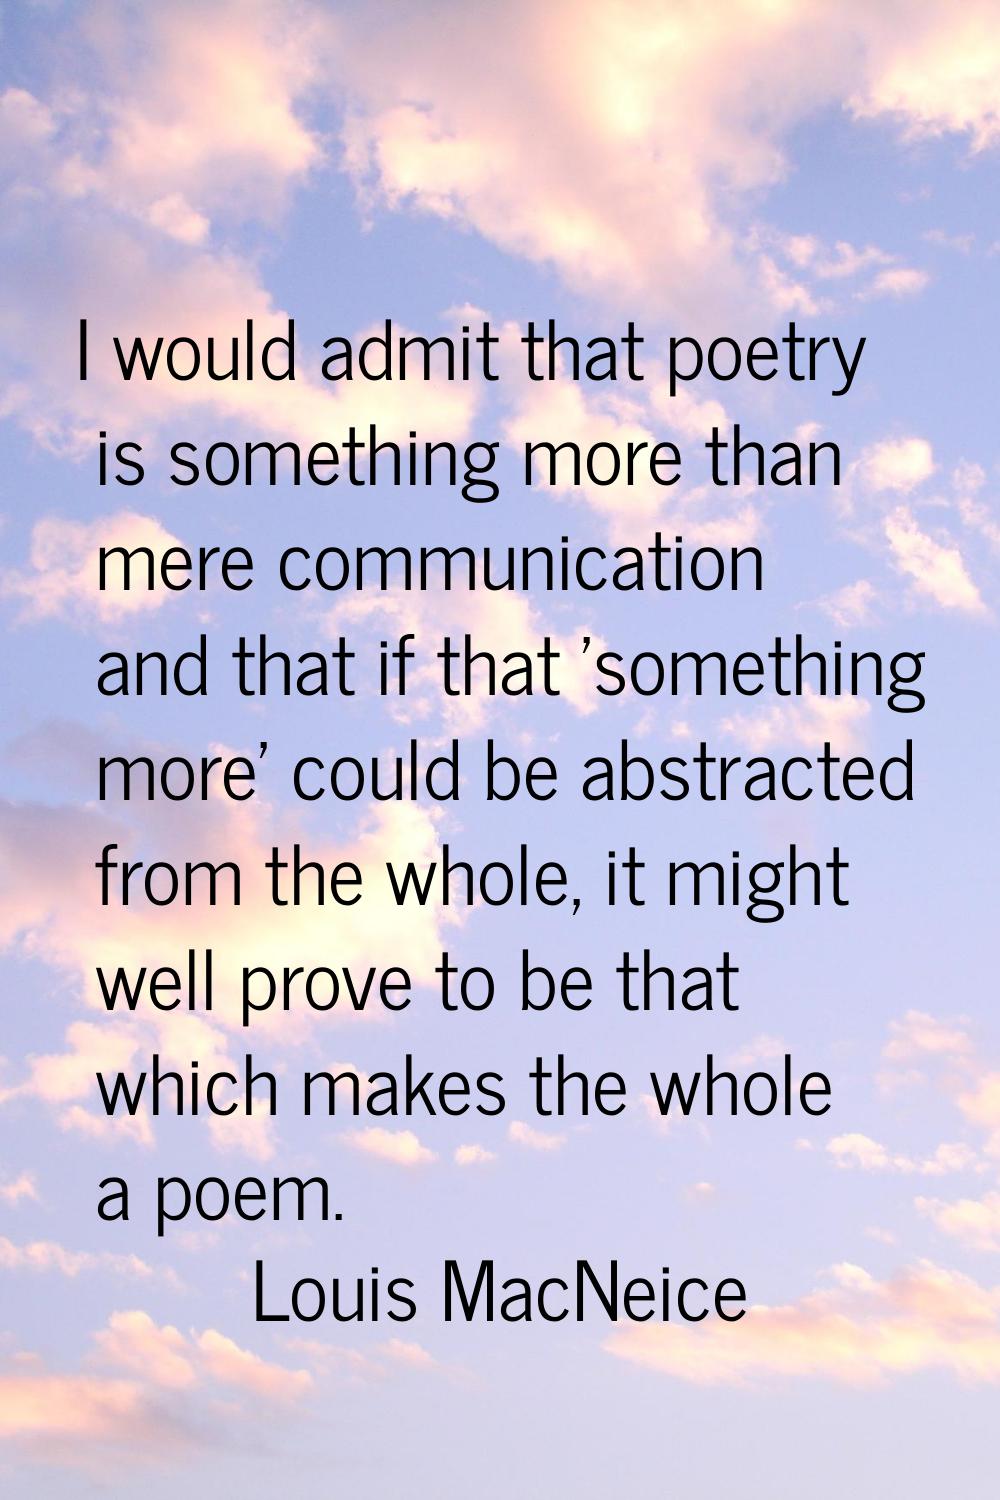 I would admit that poetry is something more than mere communication and that if that 'something mor